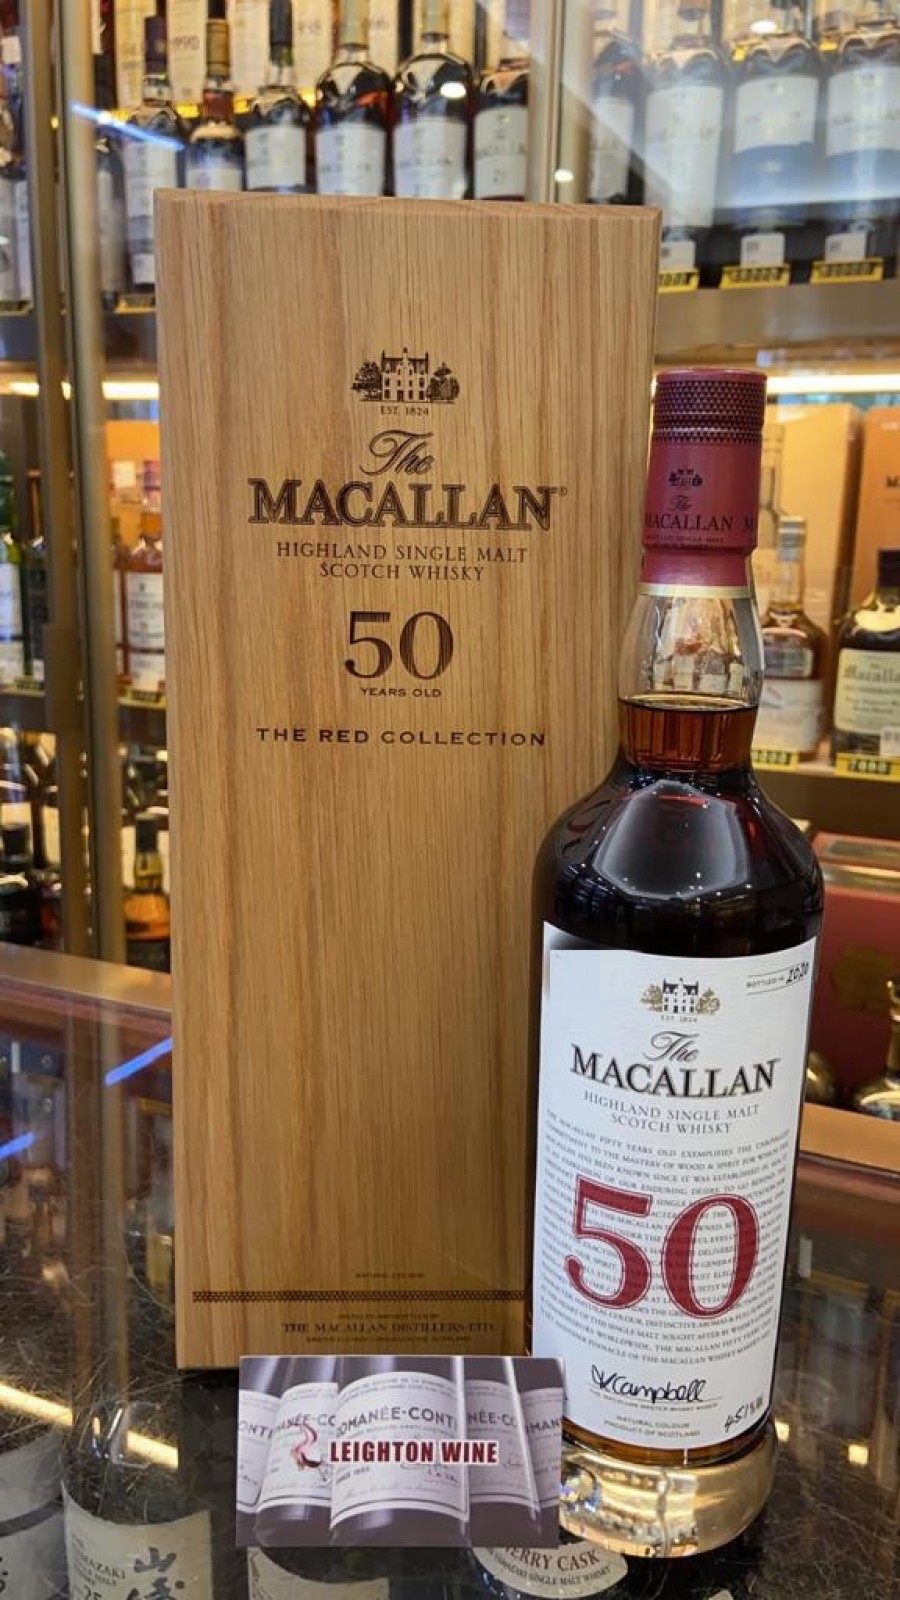 Macallan The Red Collection - 50 Years Old